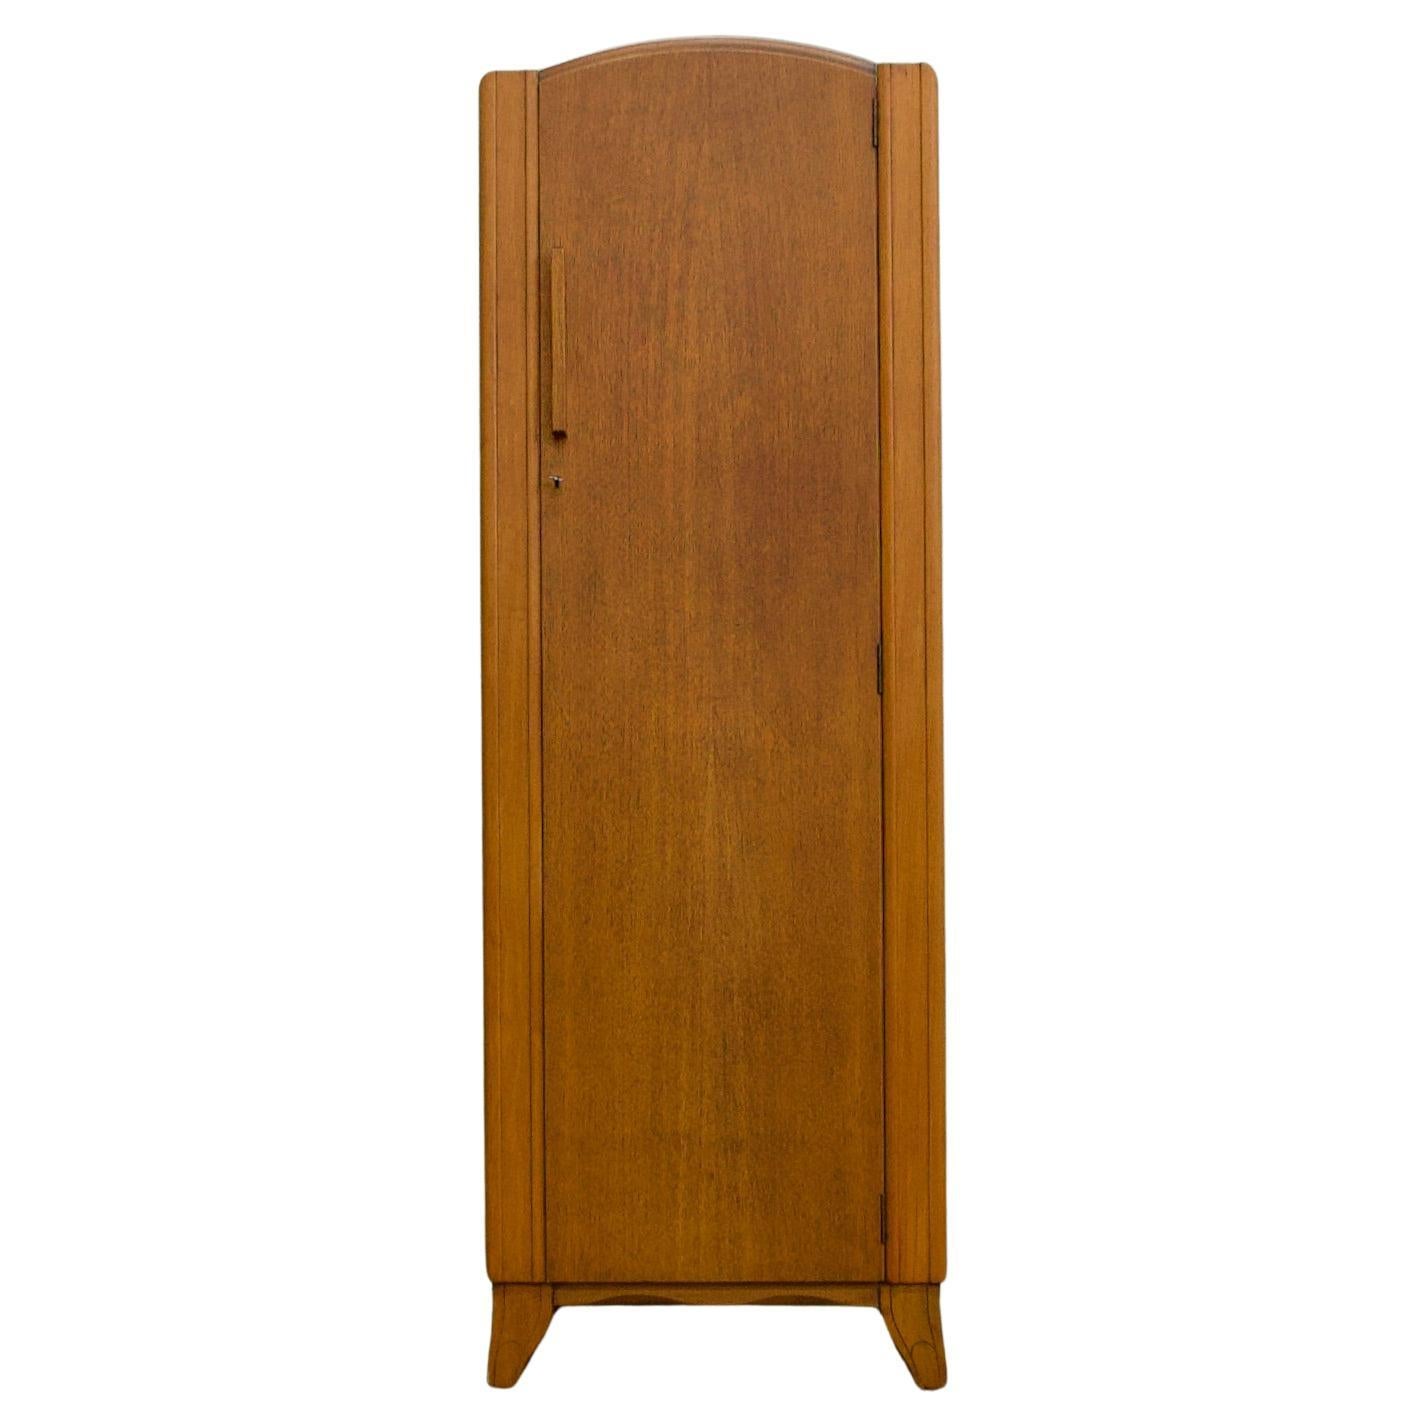 British Vintage Art Deco Style Oak Wardrobe from Lebus, 1950s For Sale